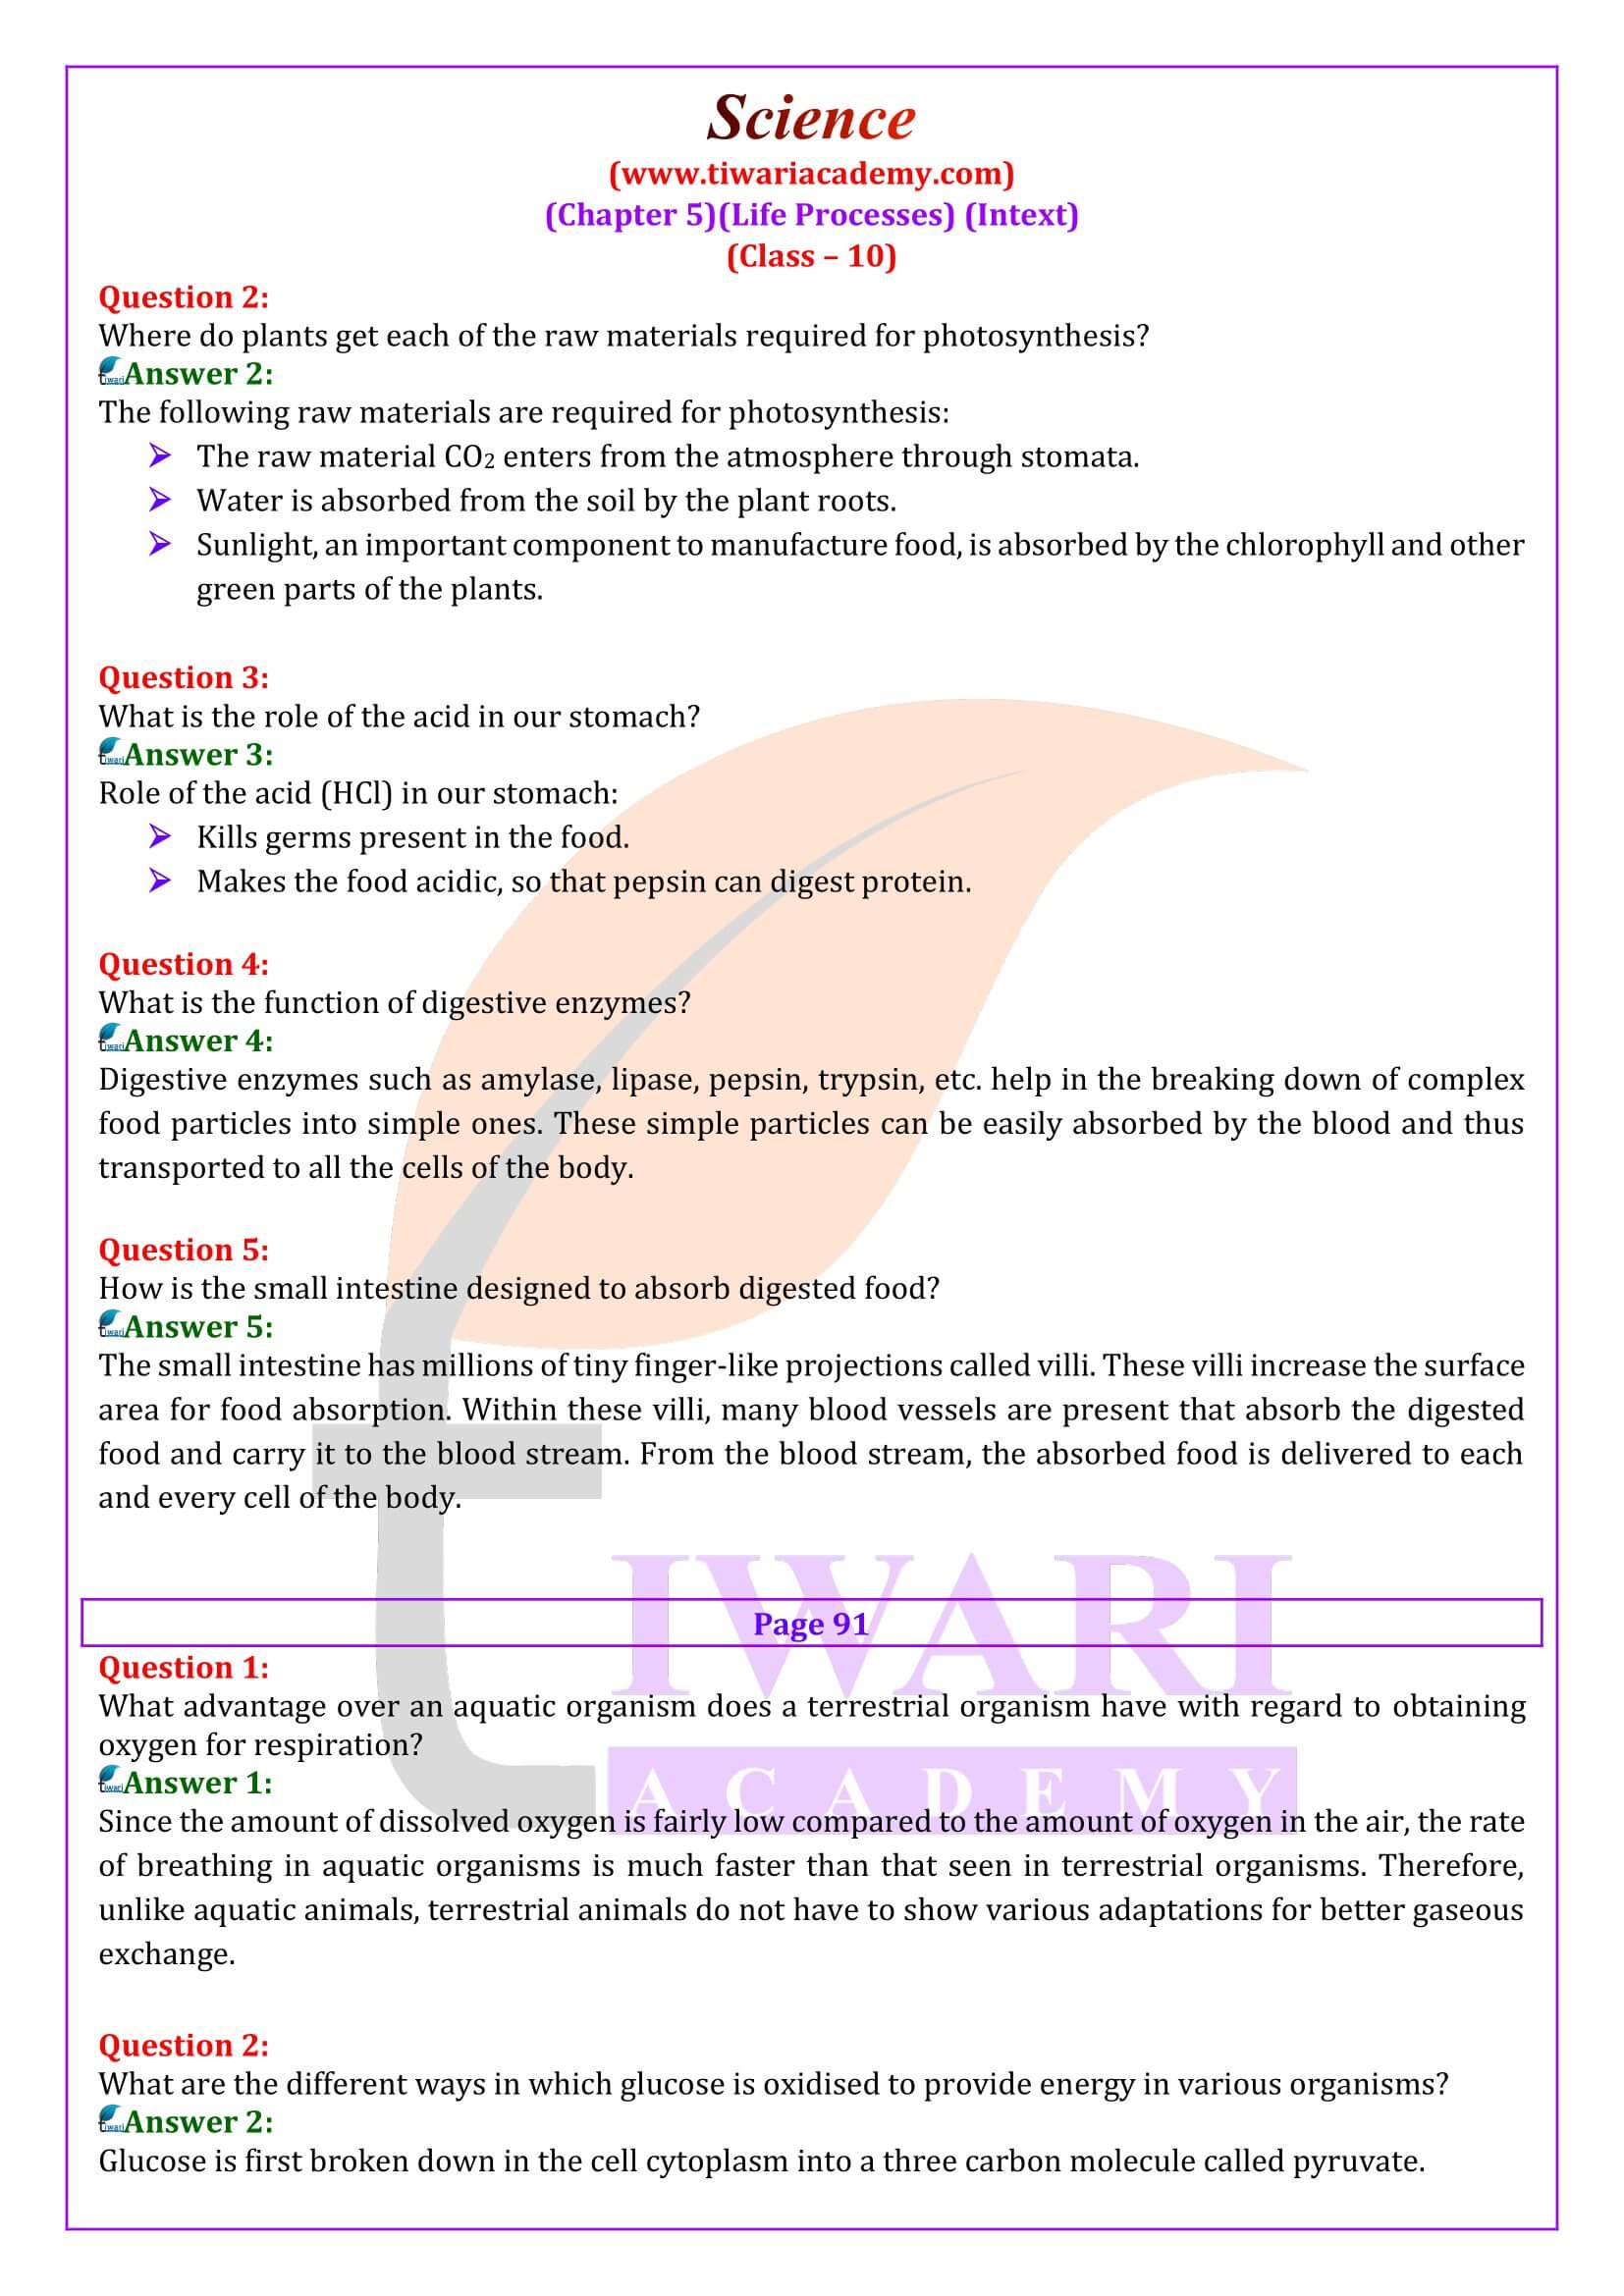 NCERT Solutions for Class 10 Science Chapter 5 Guide